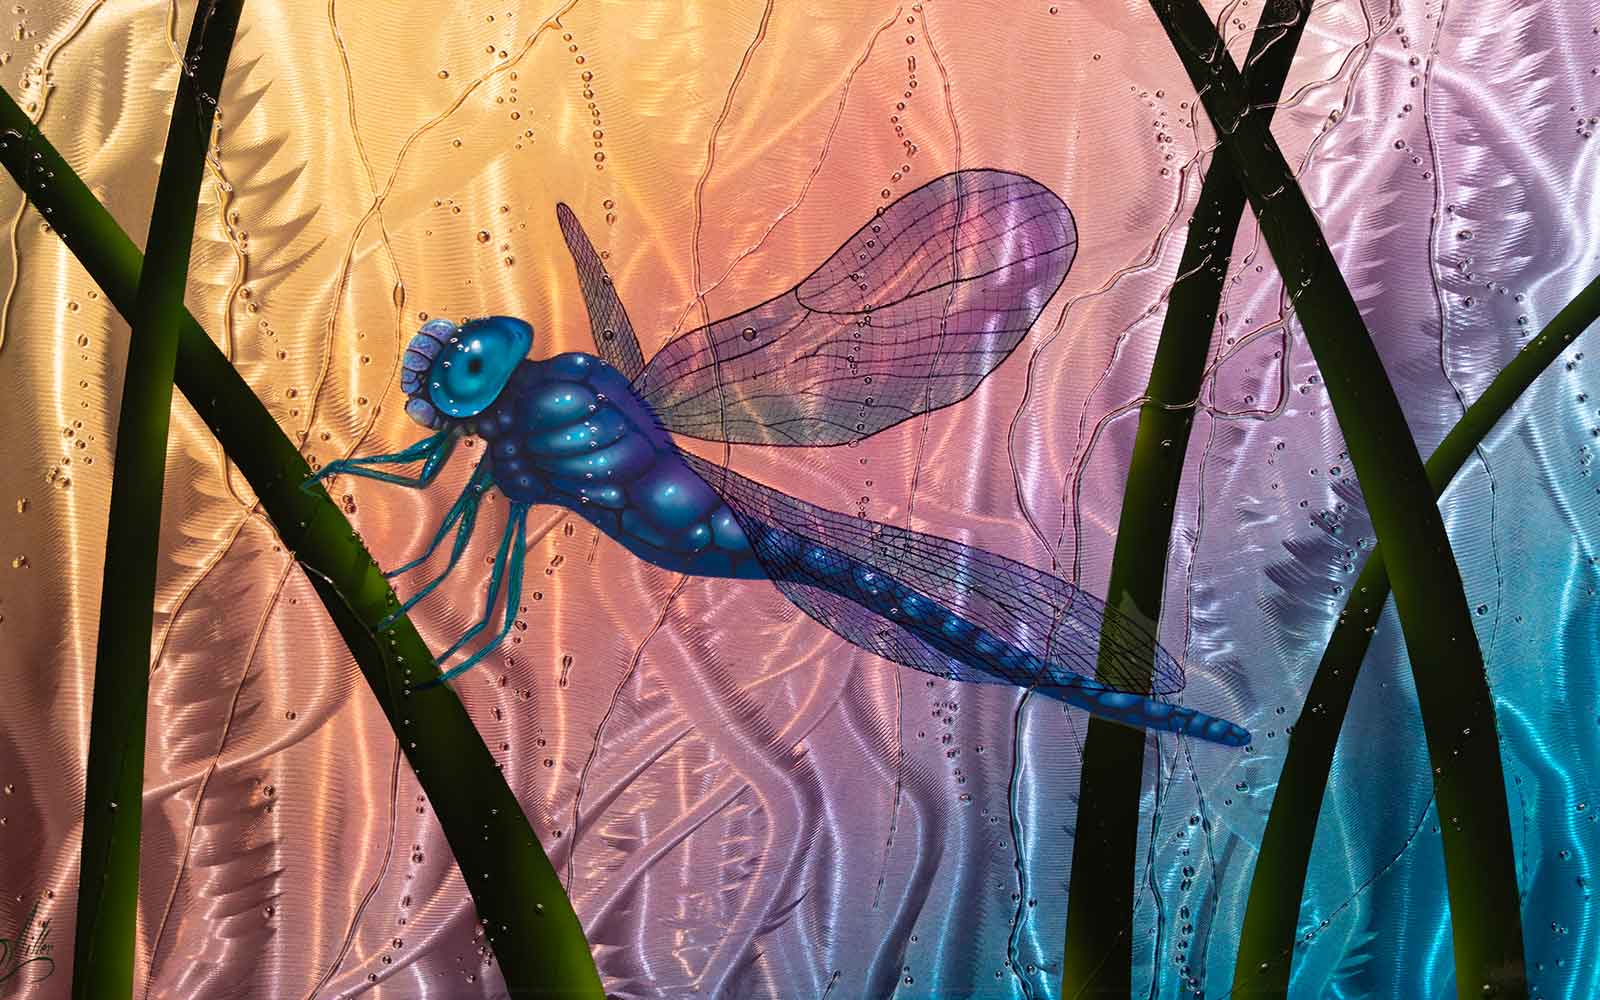 Dragon Fly painting on Metal